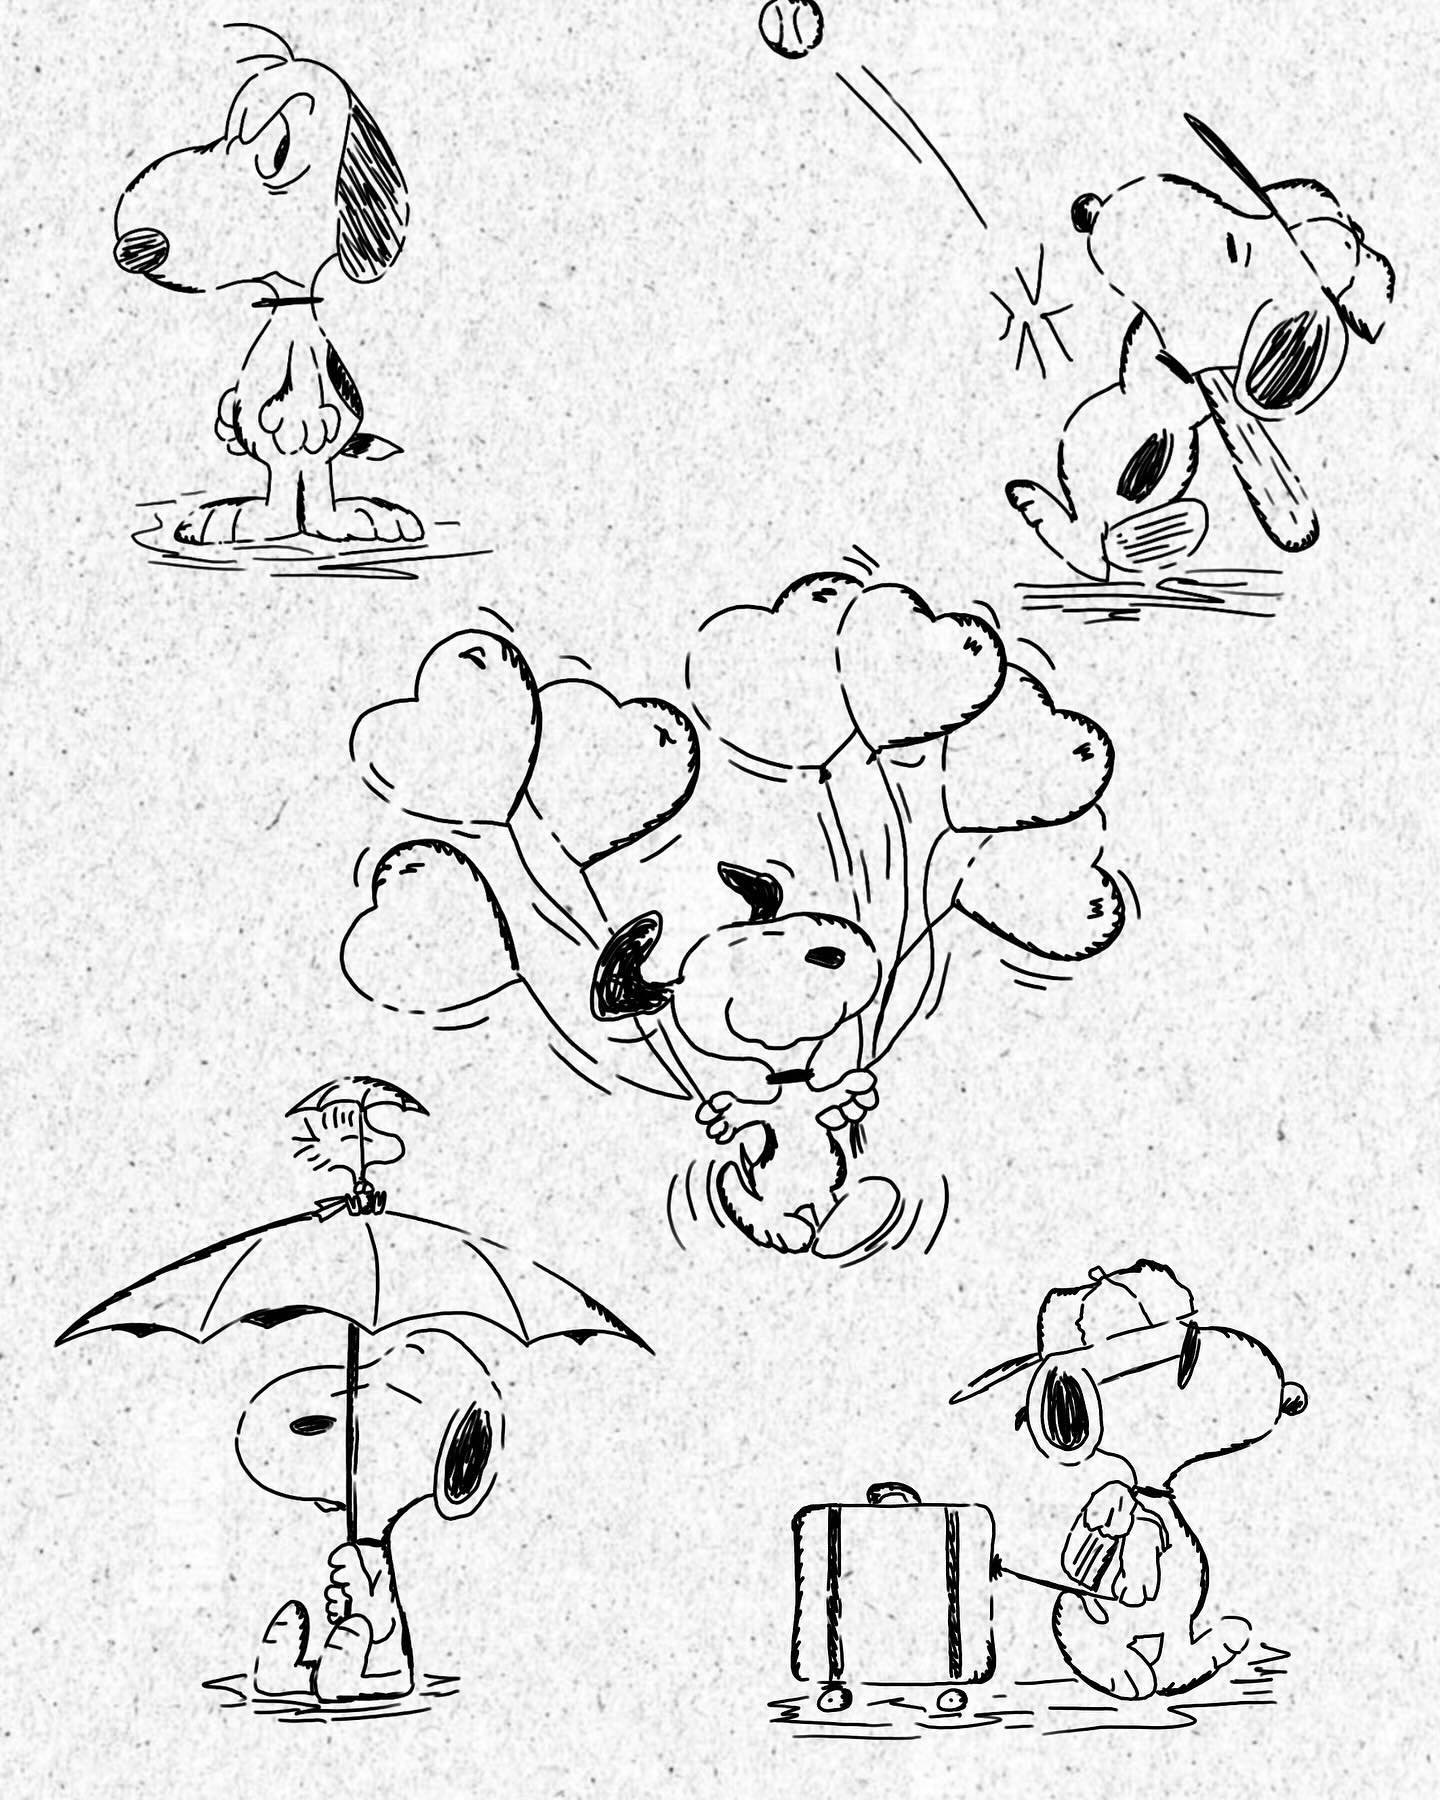 Snoopy flash and photo dump. Love you all. Thanks to everybody who contributes to my life. Grateful to be where I&rsquo;m at.